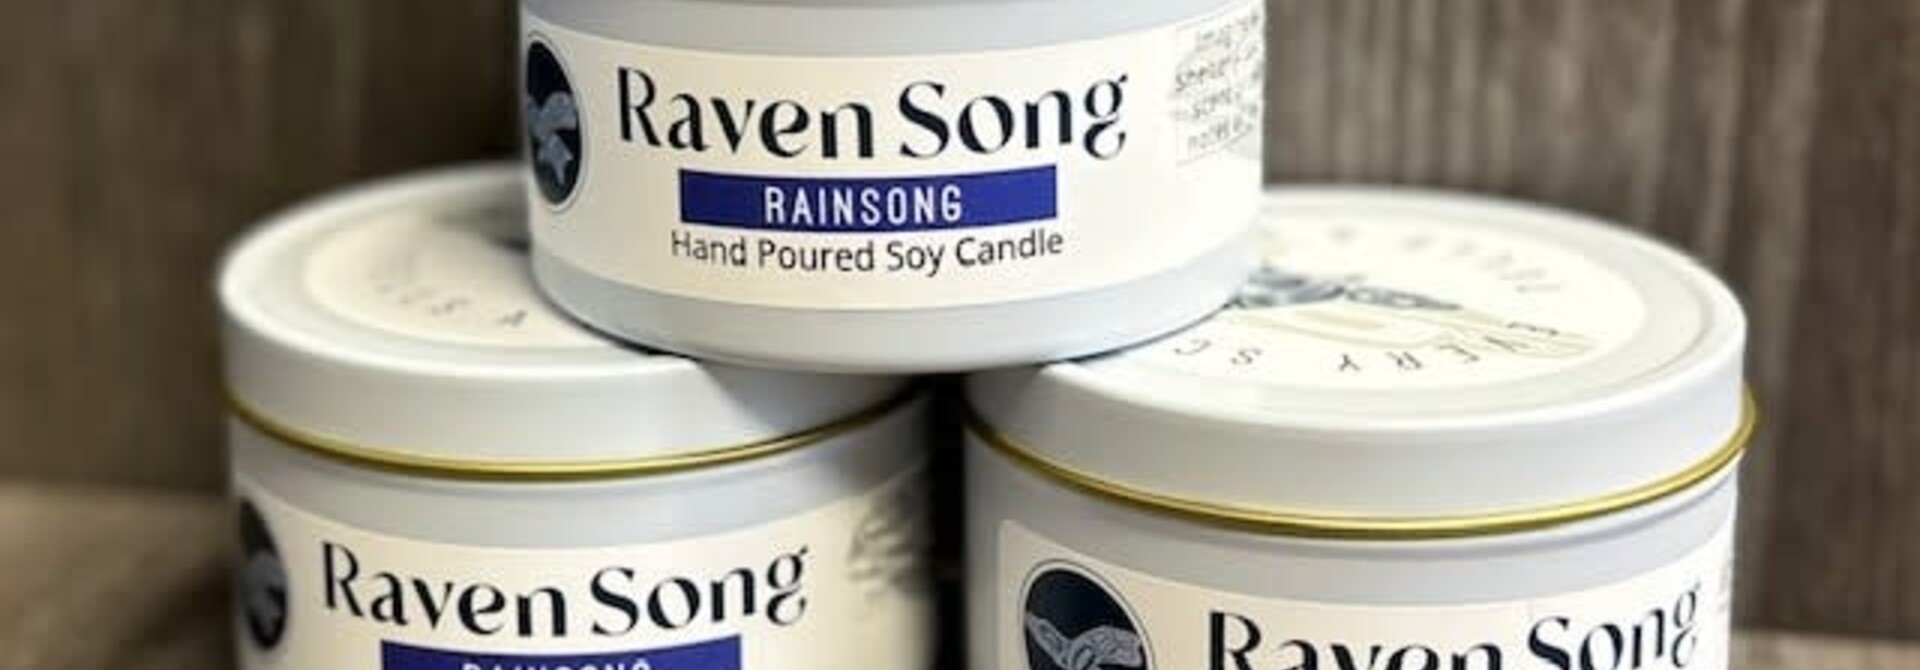 Raven Song Hand poured Soy  - Candle Rainsong